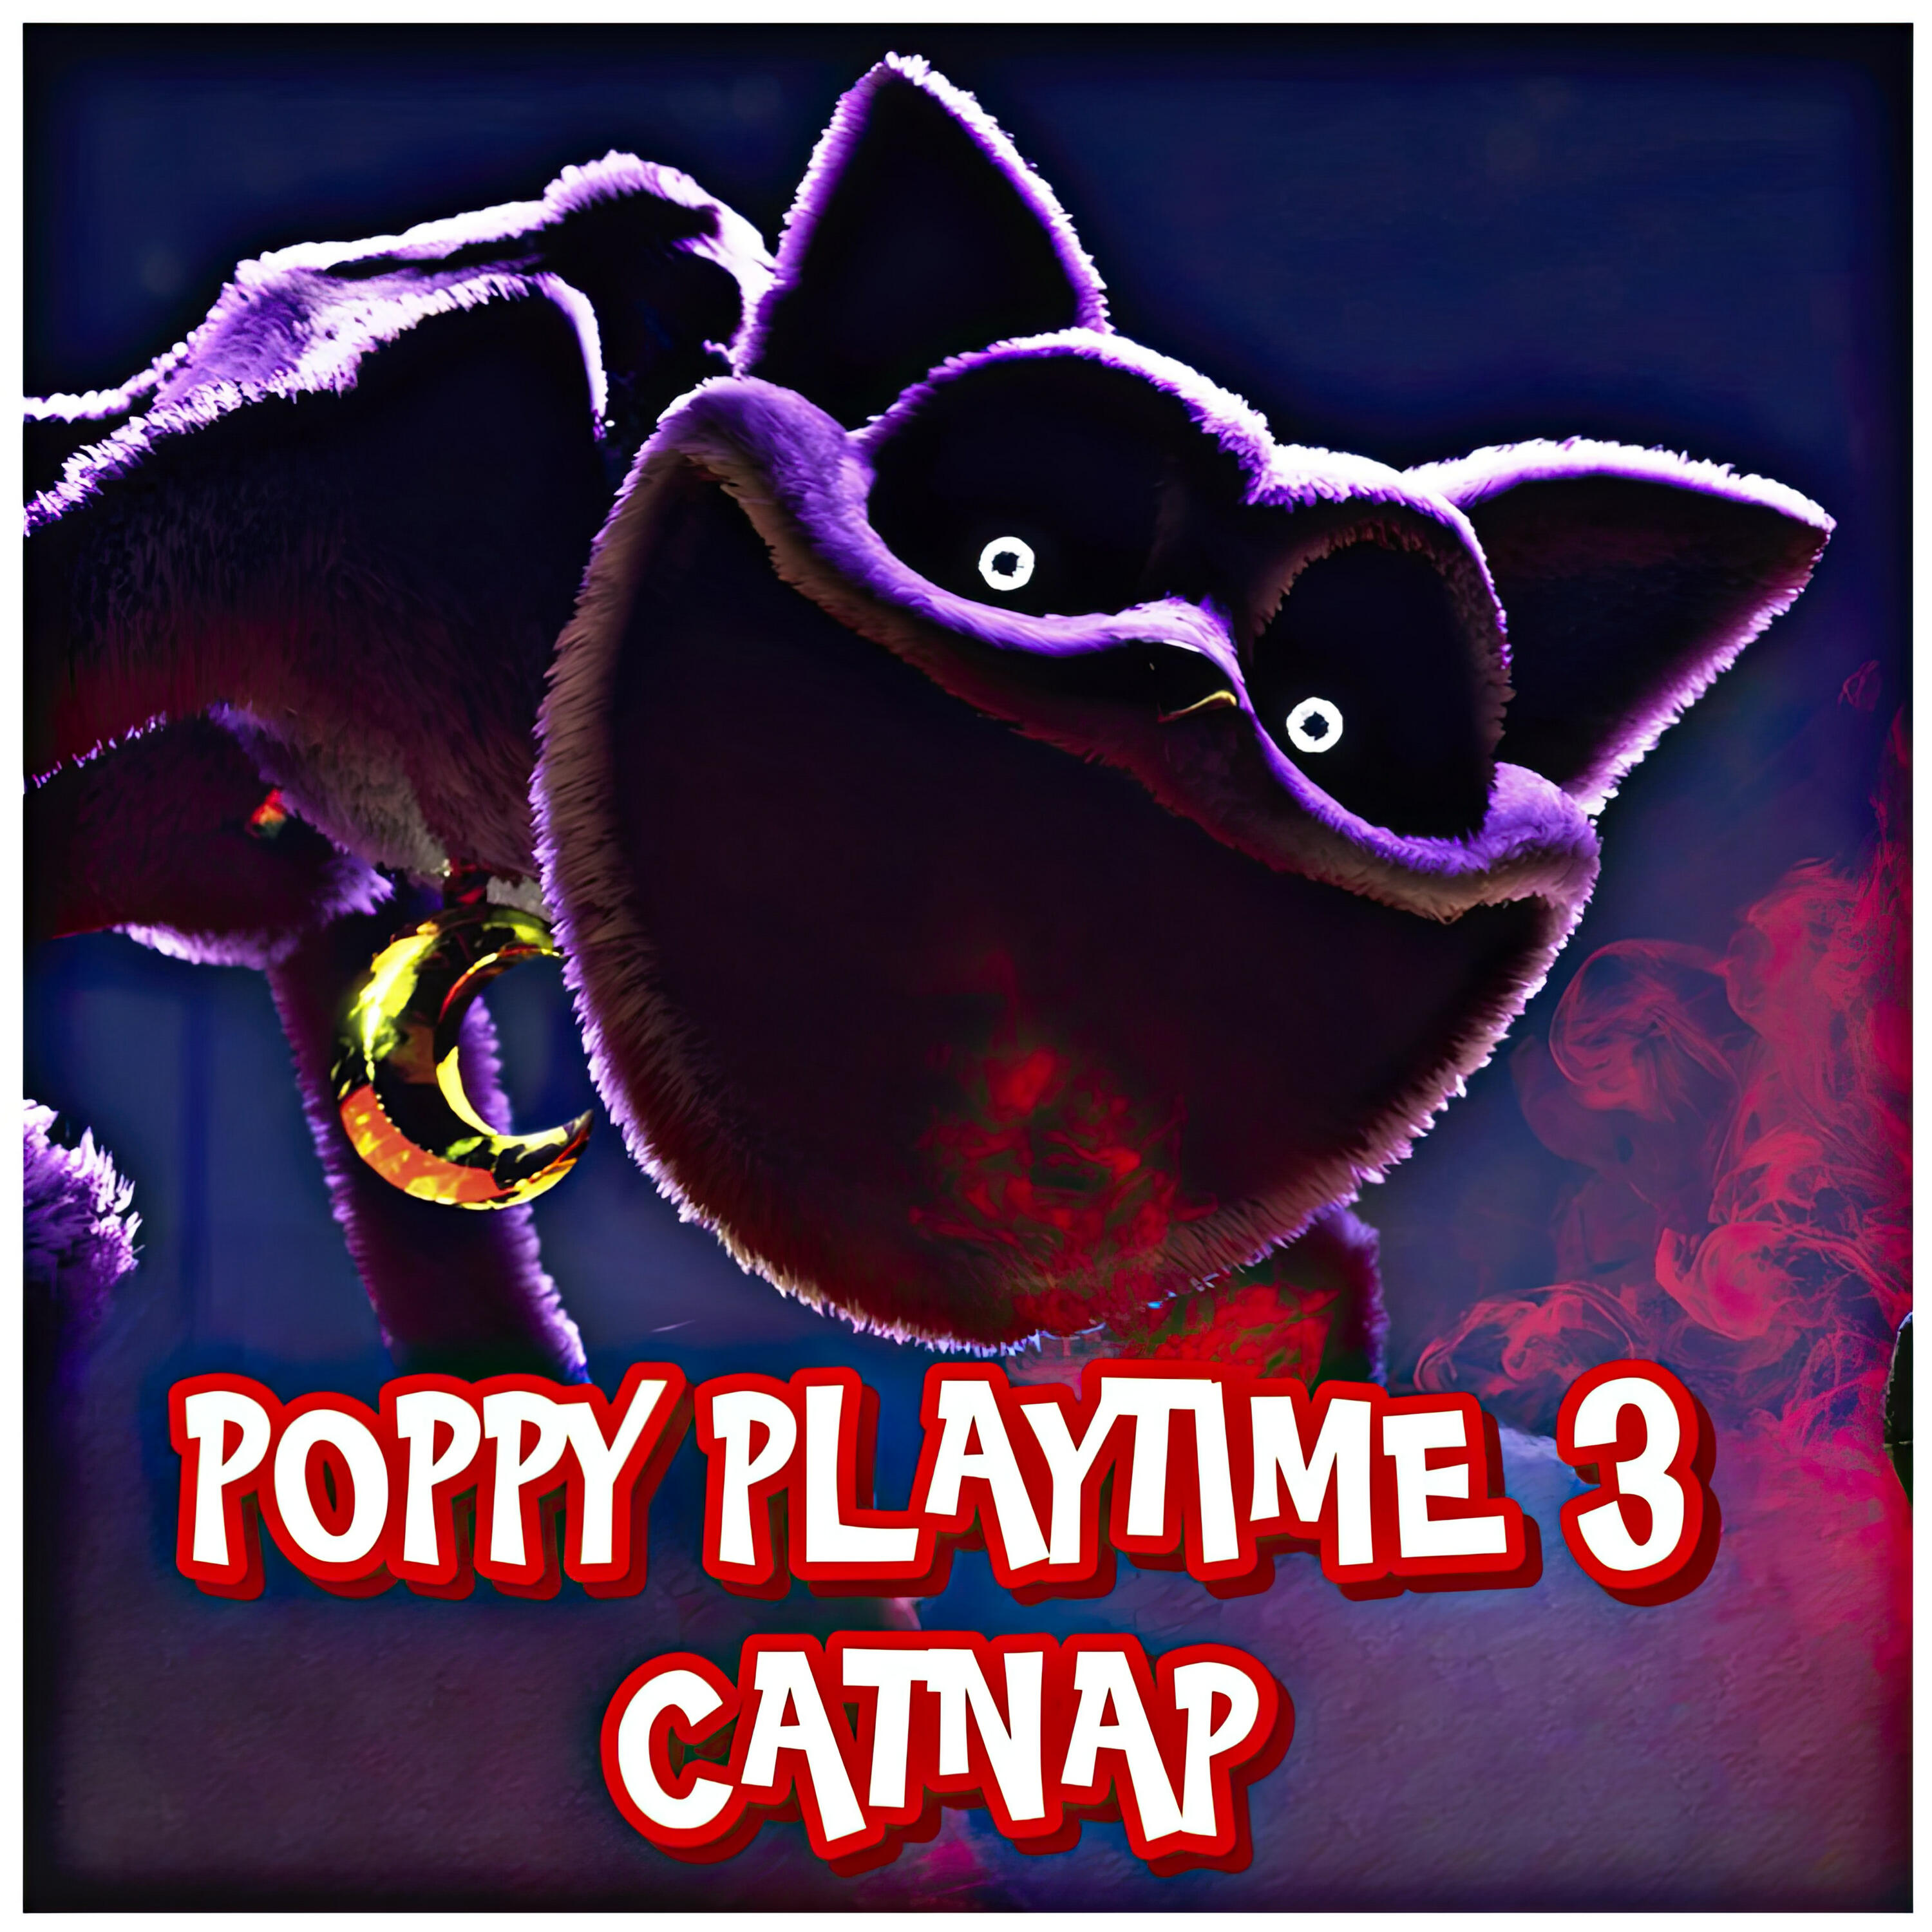 Stream Poppy Playtime Song (Chapter 1) - Huggy Wuggy by